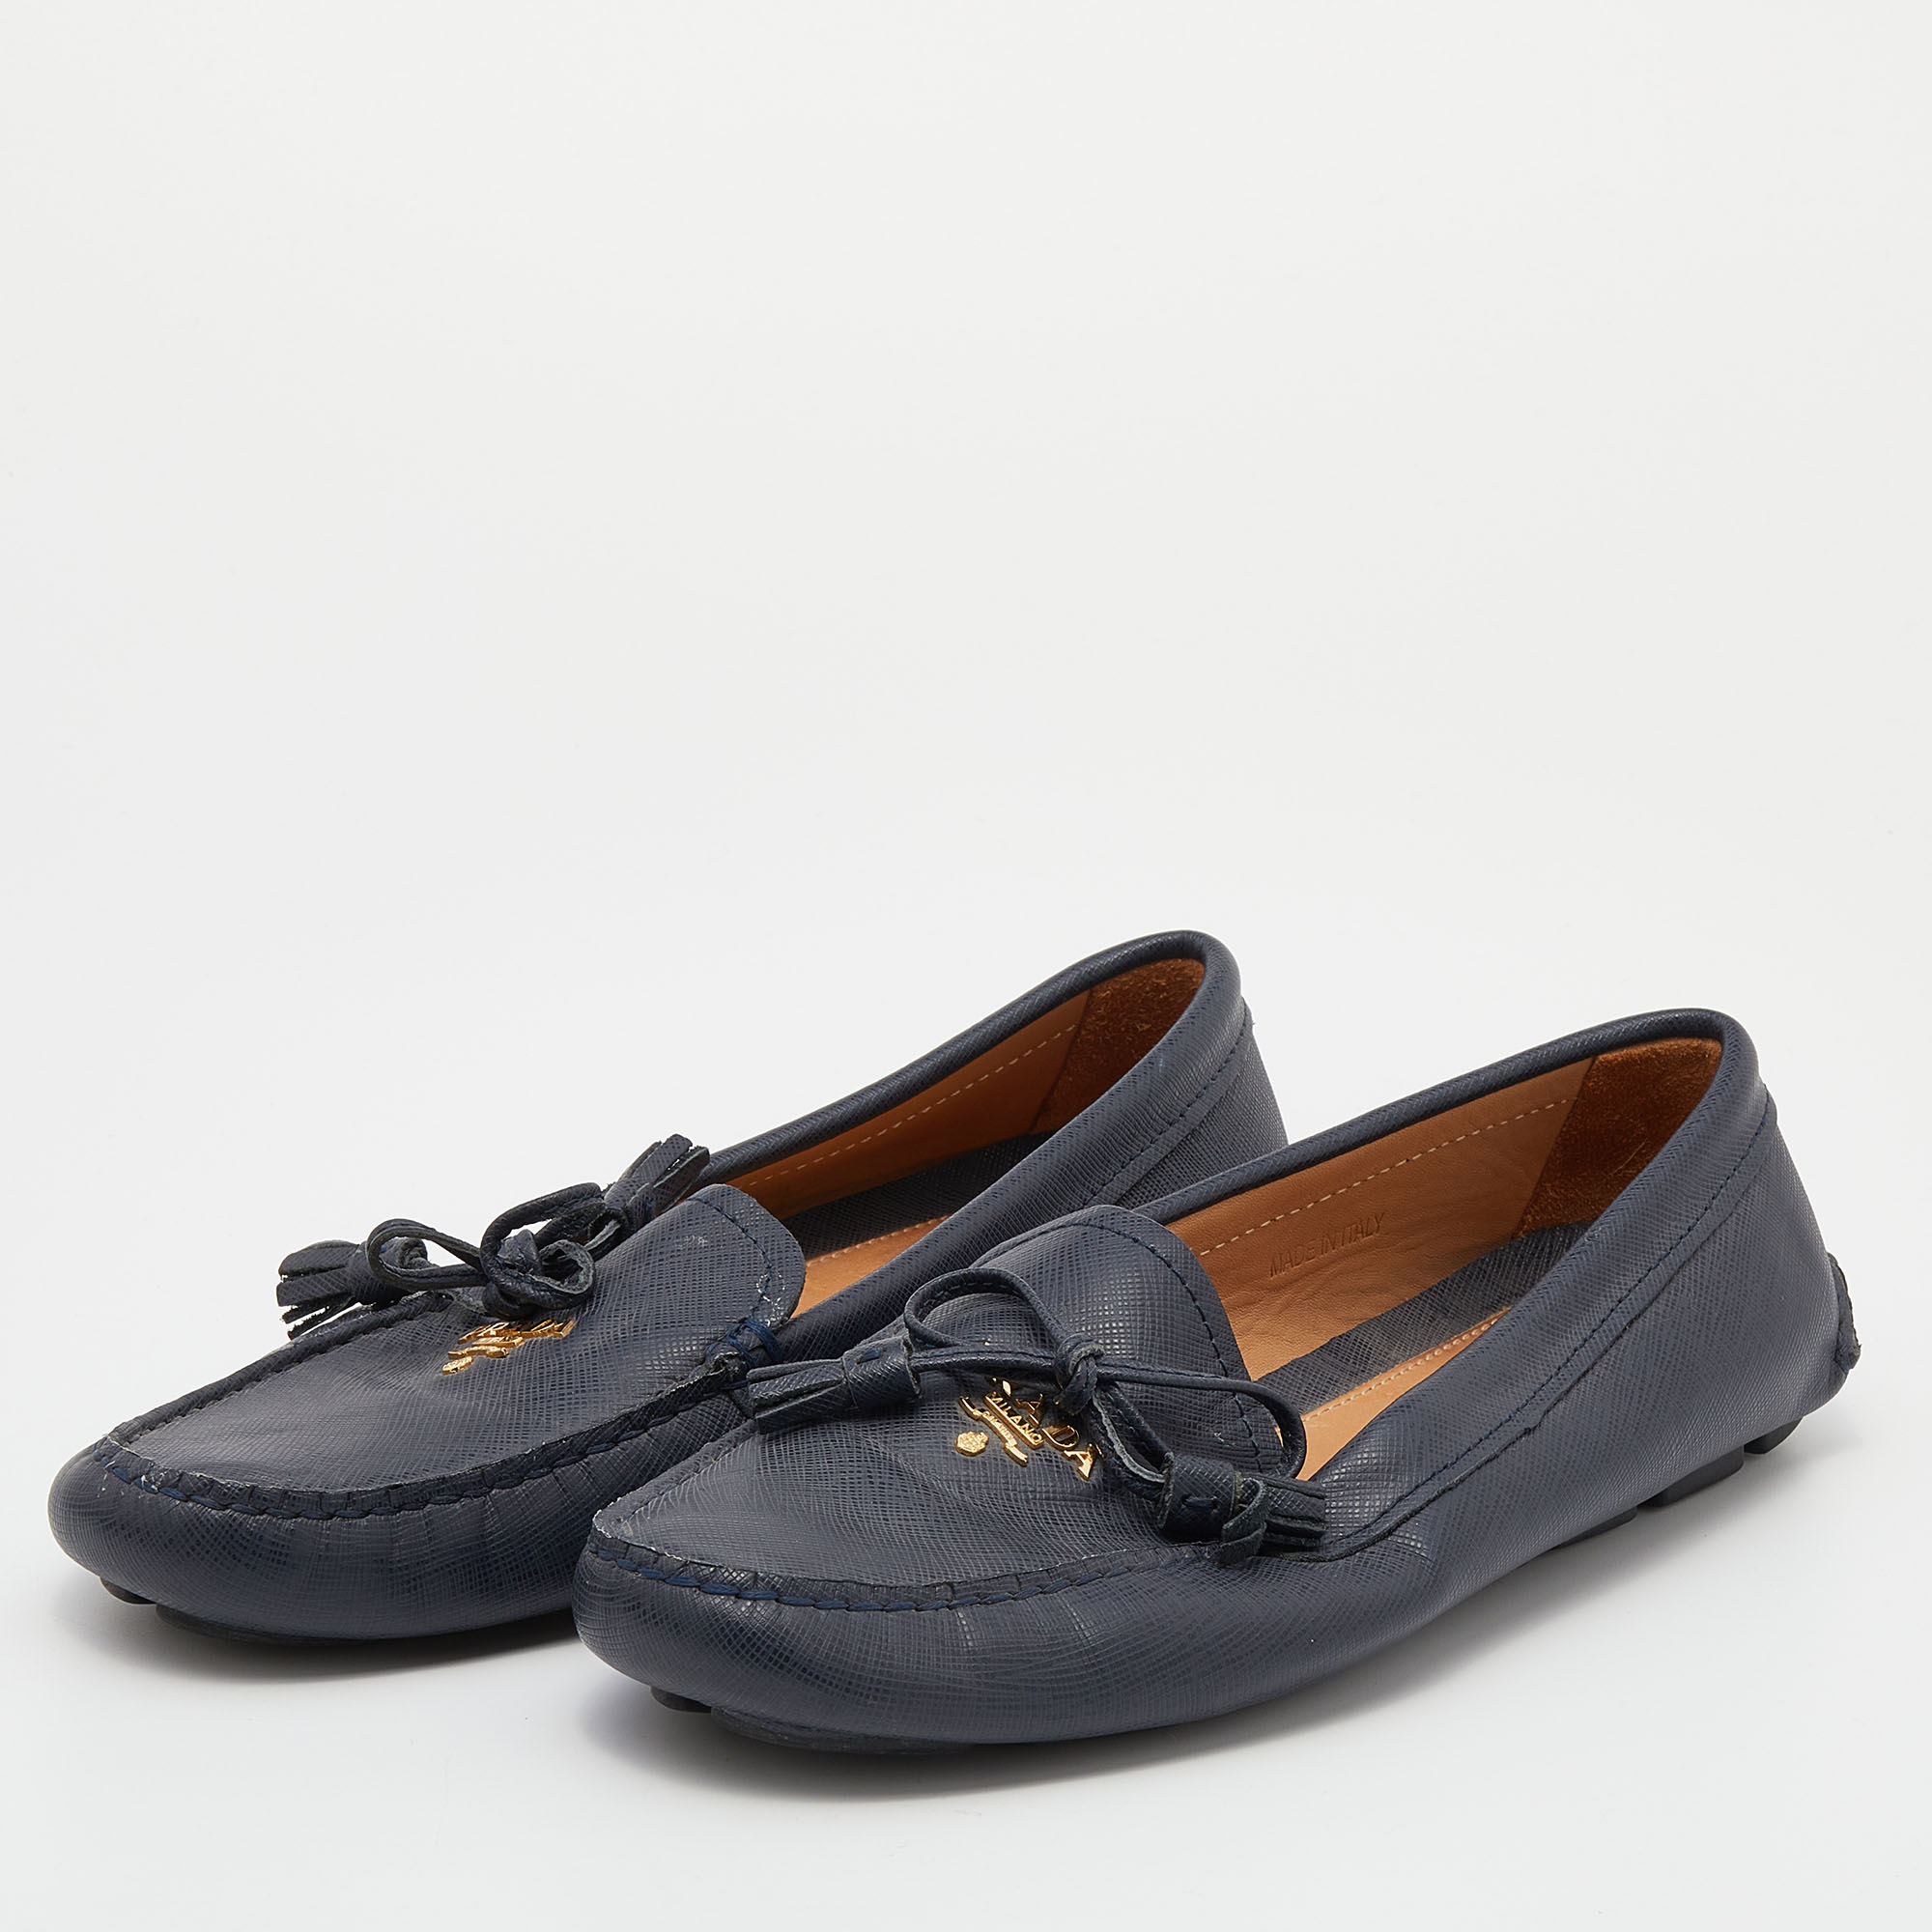 

Prada Navy Blue Saffiano Leather Bow Slip On Loafers Size